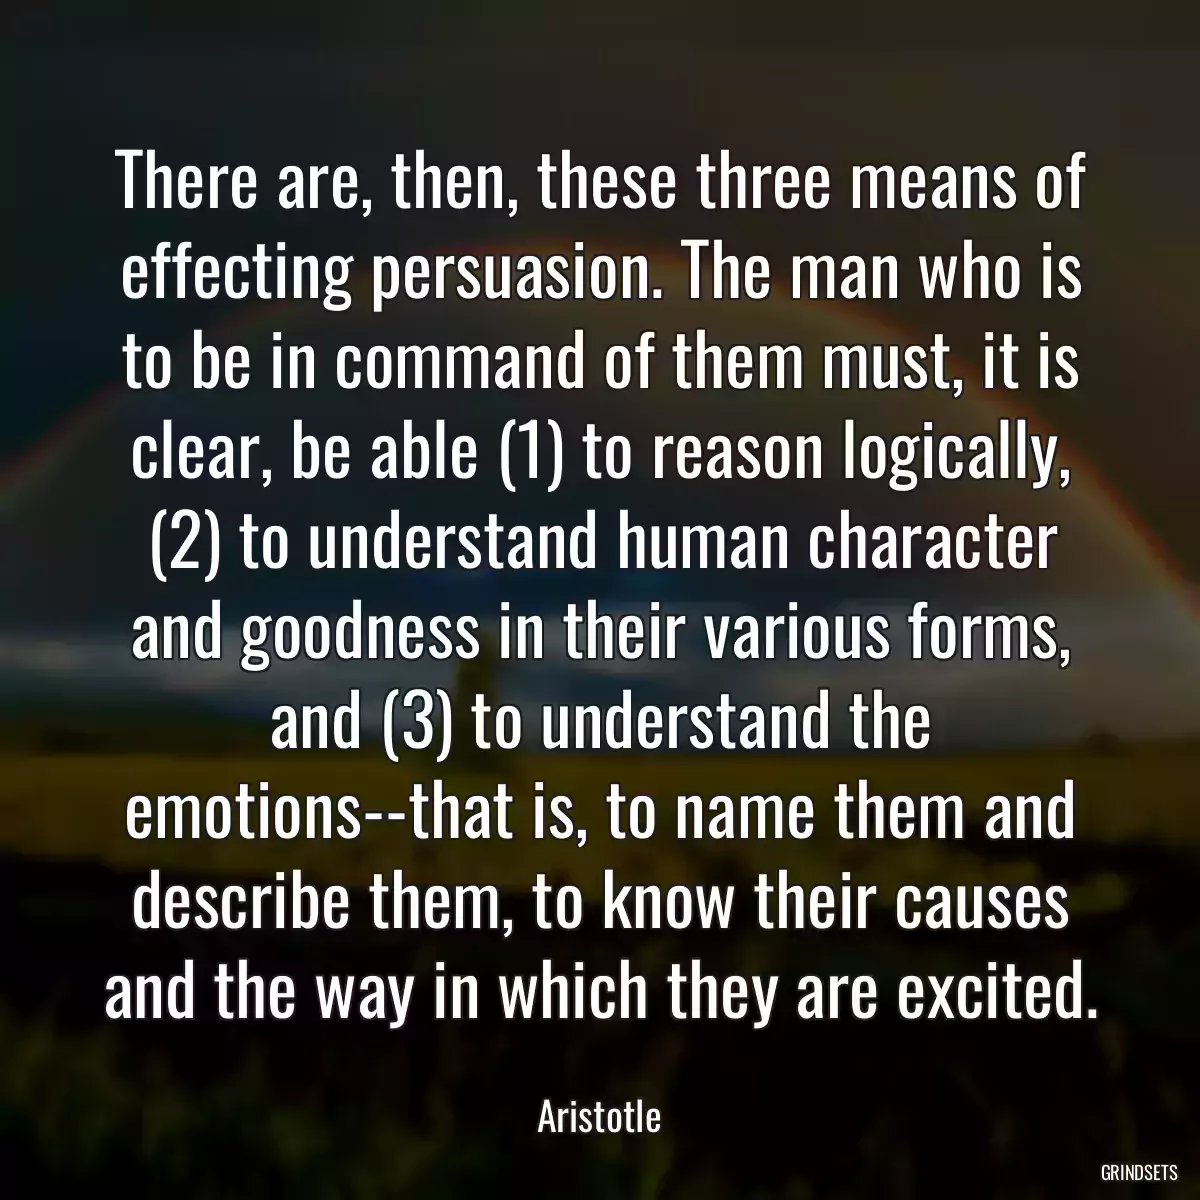 There are, then, these three means of effecting persuasion. The man who is to be in command of them must, it is clear, be able (1) to reason logically, (2) to understand human character and goodness in their various forms, and (3) to understand the emotions--that is, to name them and describe them, to know their causes and the way in which they are excited.